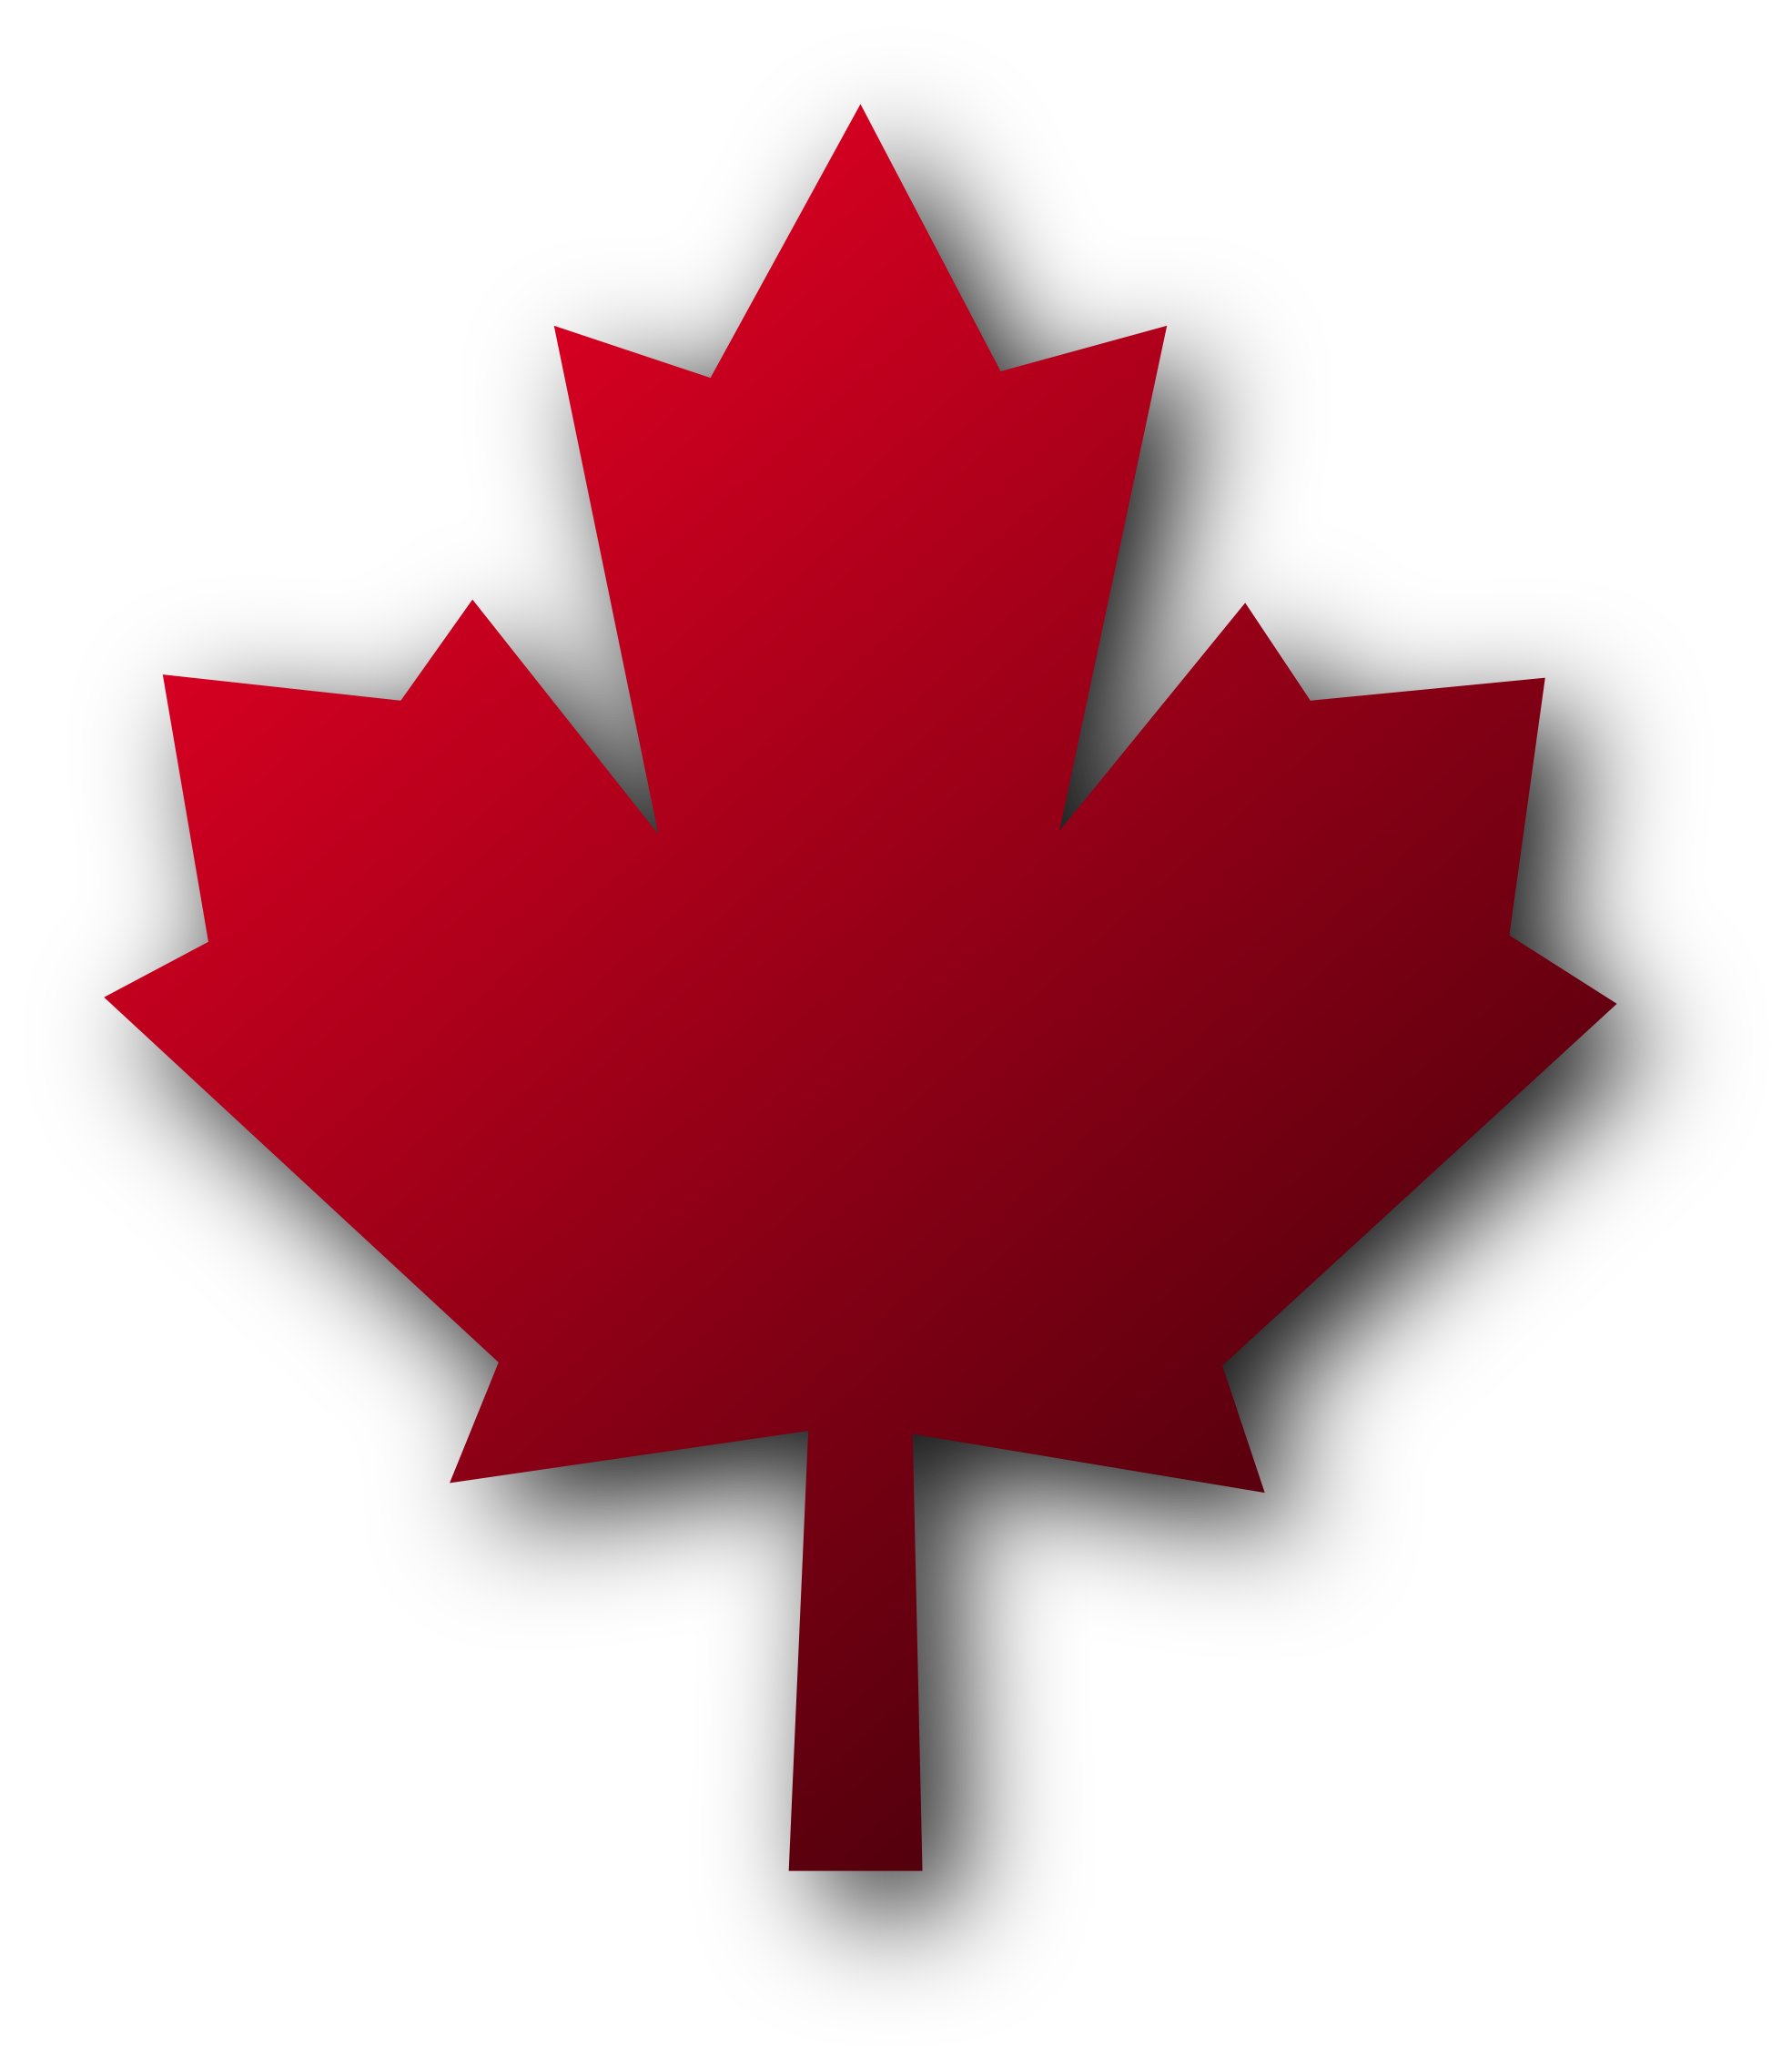 Maple Leaf Clipart Black And White - Free Clipart ...